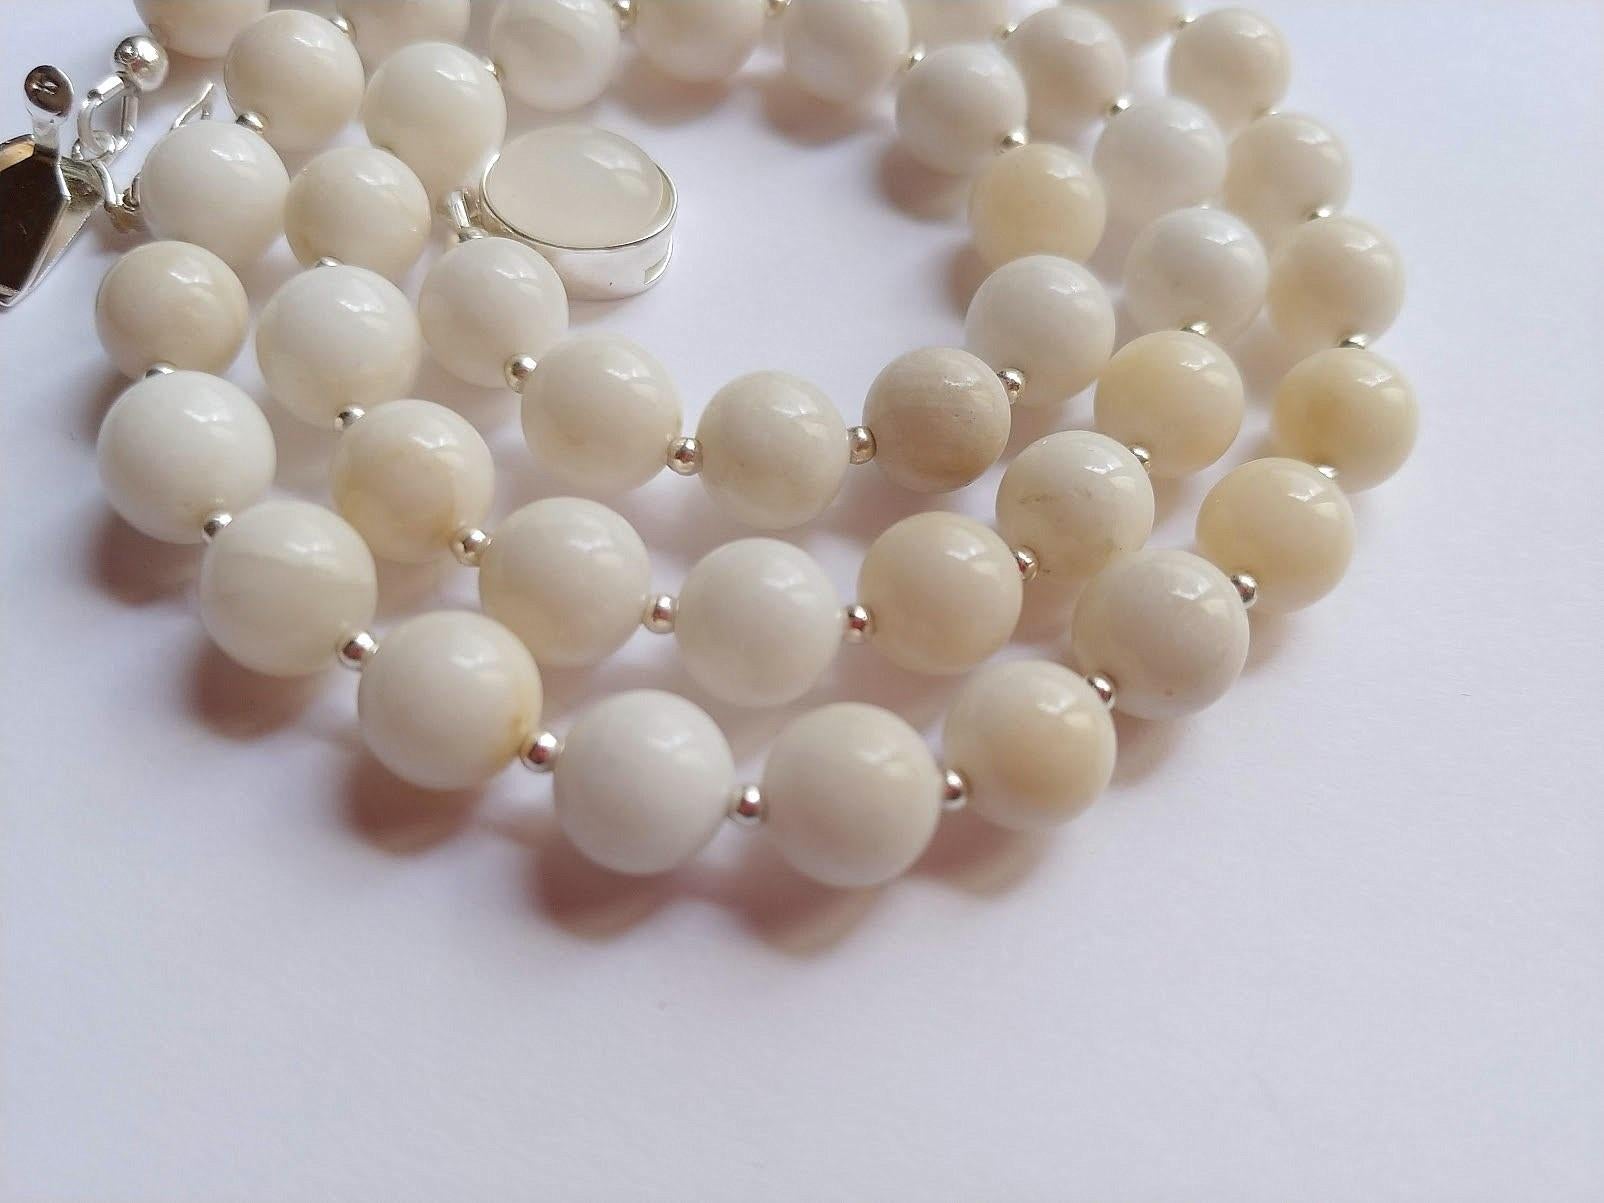 This is an extremely rare natural white jade necklace from an estate collection of approximately 1980 years.

The jade beads on this necklace are undyed natural white jade. Sometimes, this color is called 'mutton fat.' It is opaque with an oily